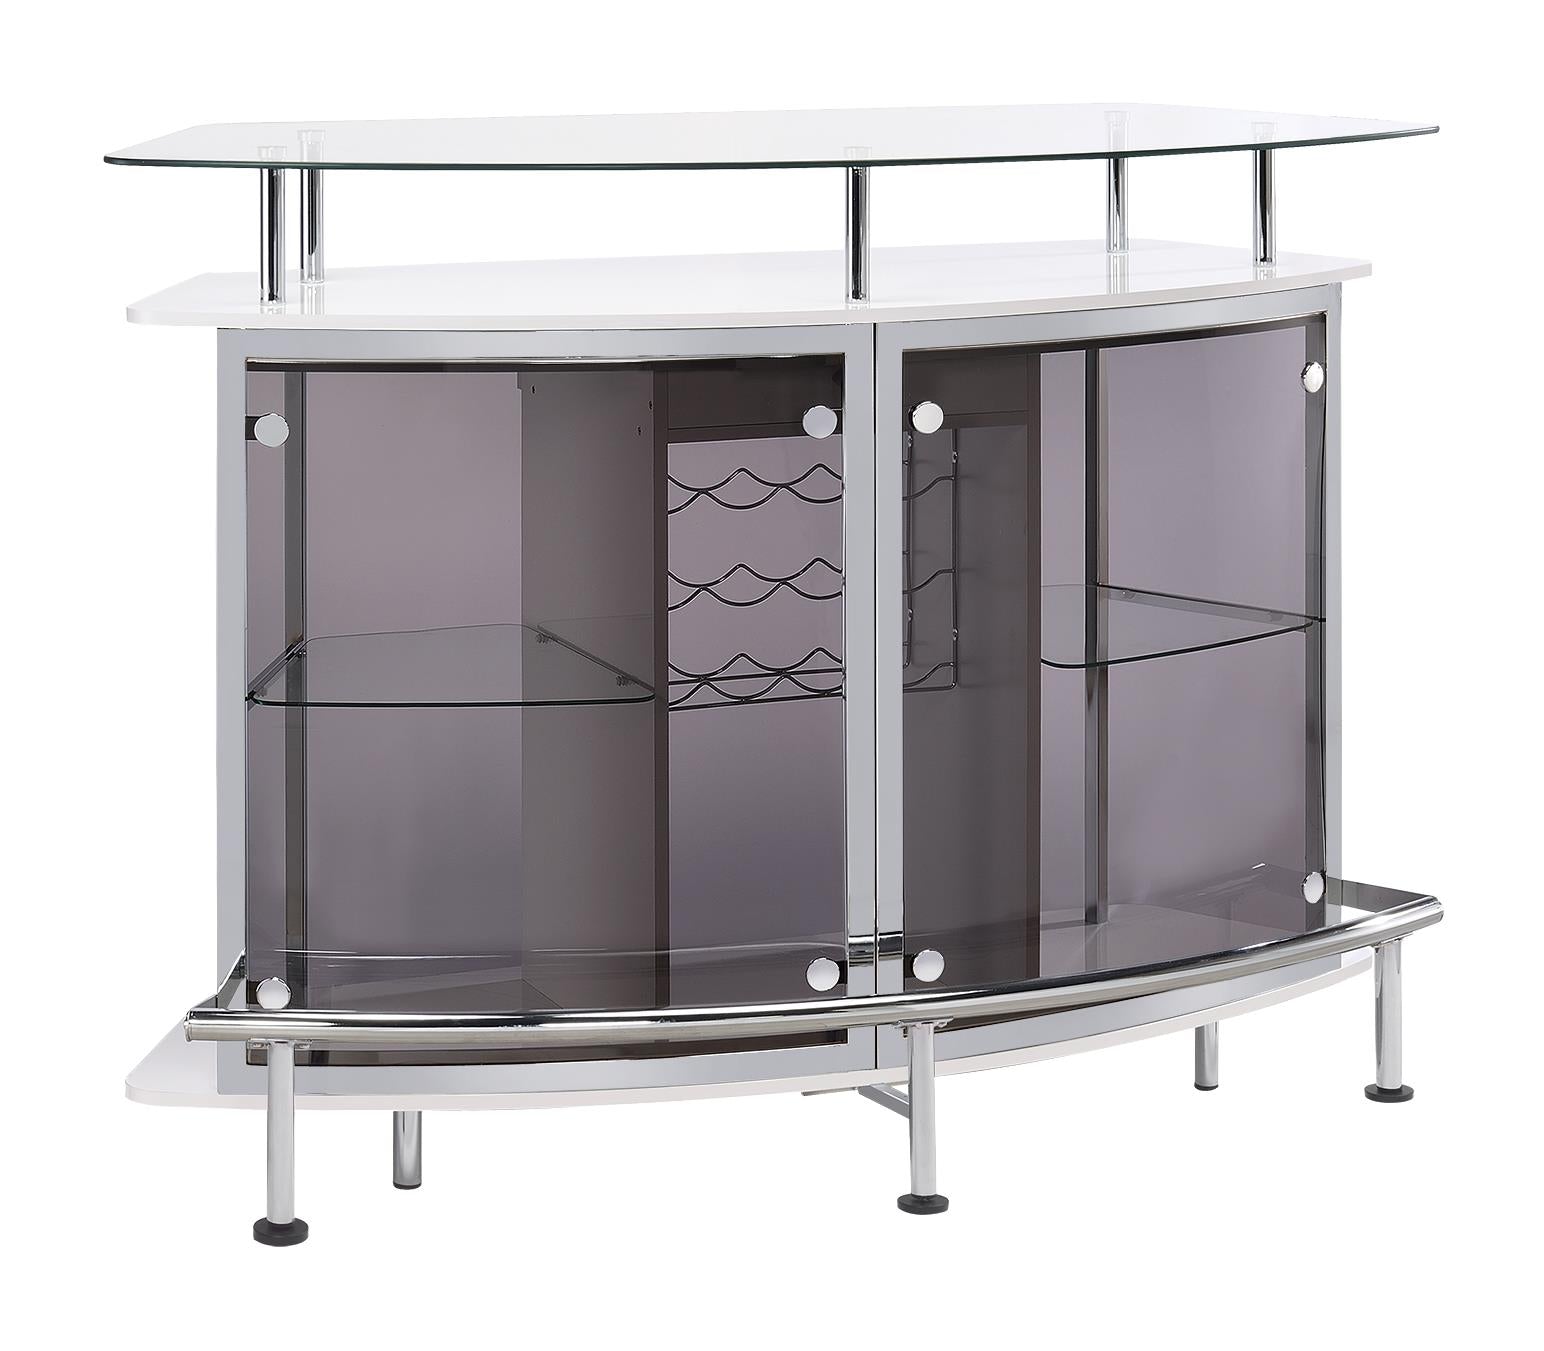 Crescent Shaped Glass Top Bar Unit with Drawer - What A Room